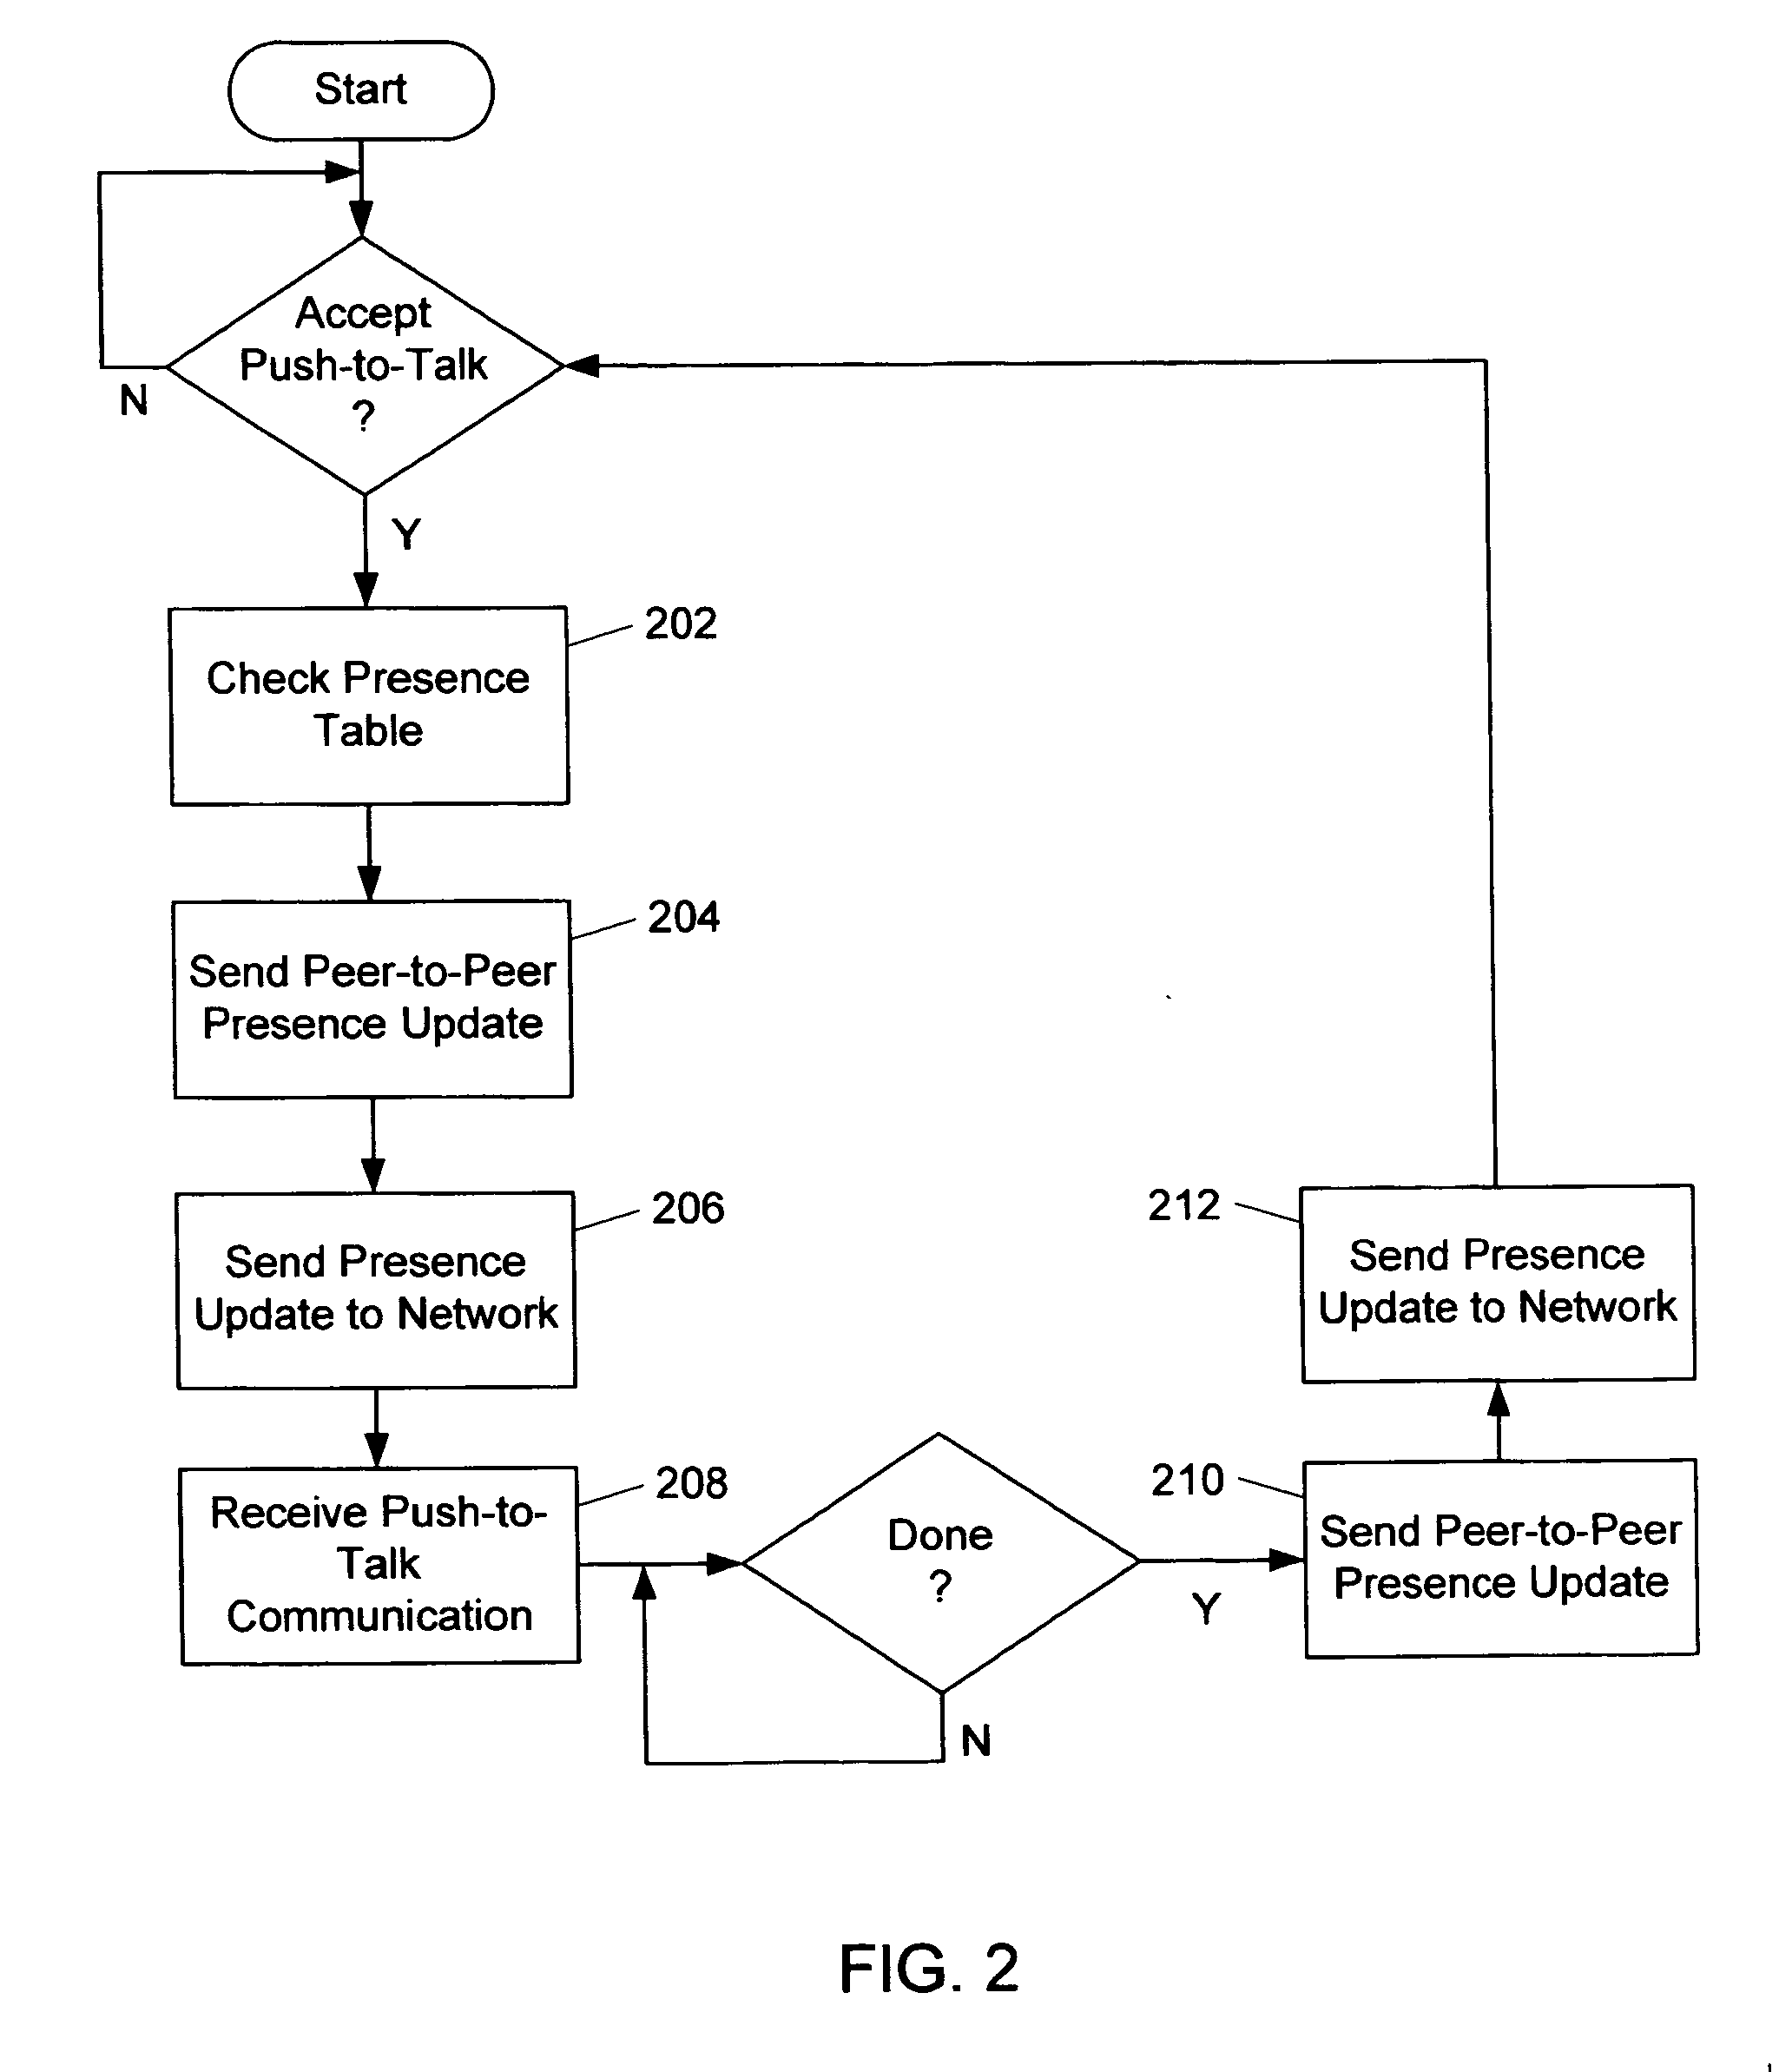 Systems and methods for updating presence in a mobile communication network